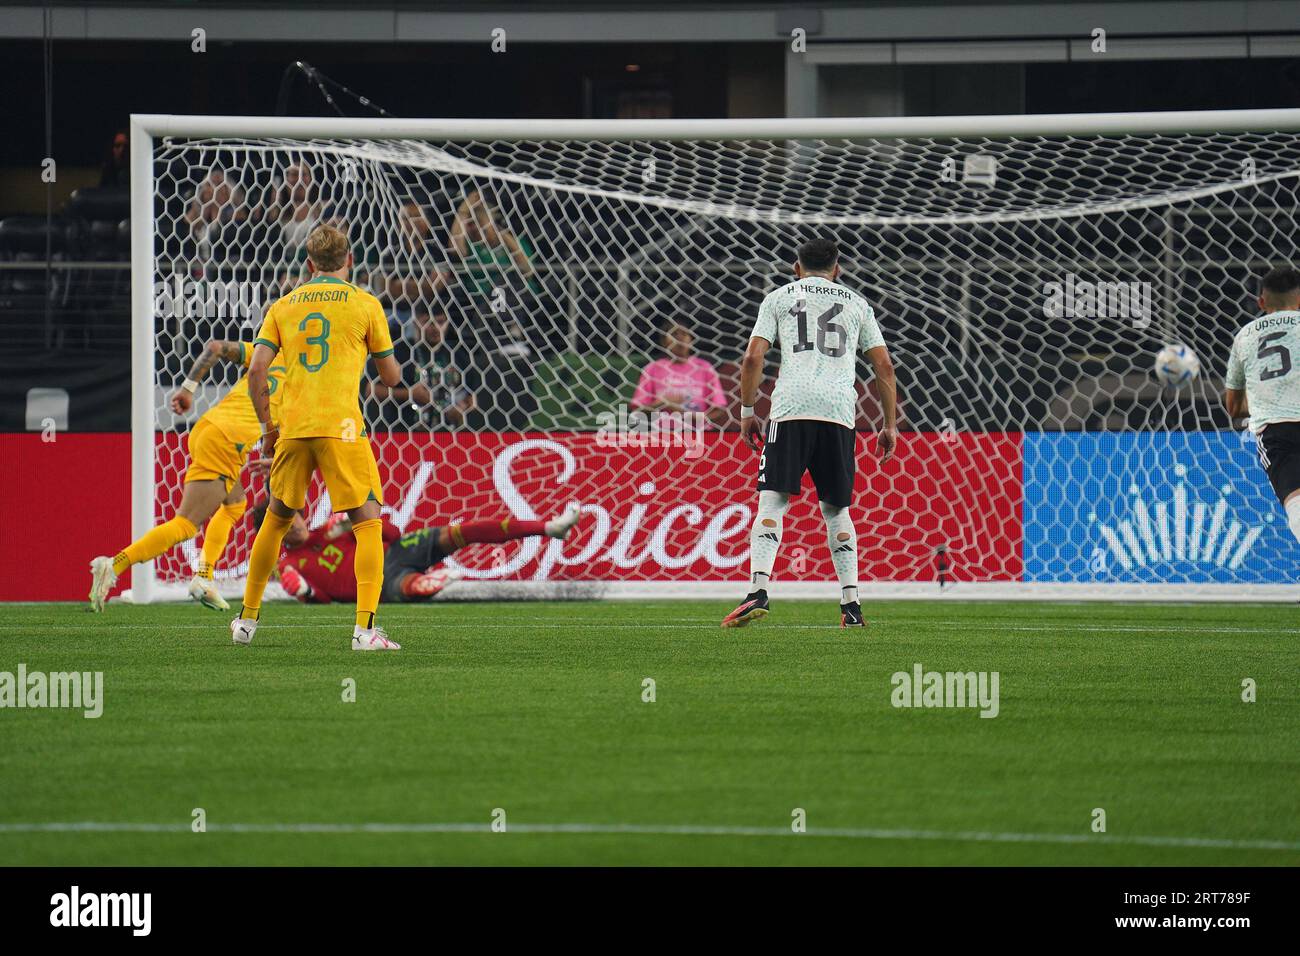 Arlington, Texas, United States: Hector Herrera (MX) watches the goal of Martin Boyle (AU) during the international soccer game between Mexico and Australia played at AT&T Stadium on Saturday September 9, 2023.  (Photo by Javier Vicencio / Eyepix Group/Sipa USA) Stock Photo